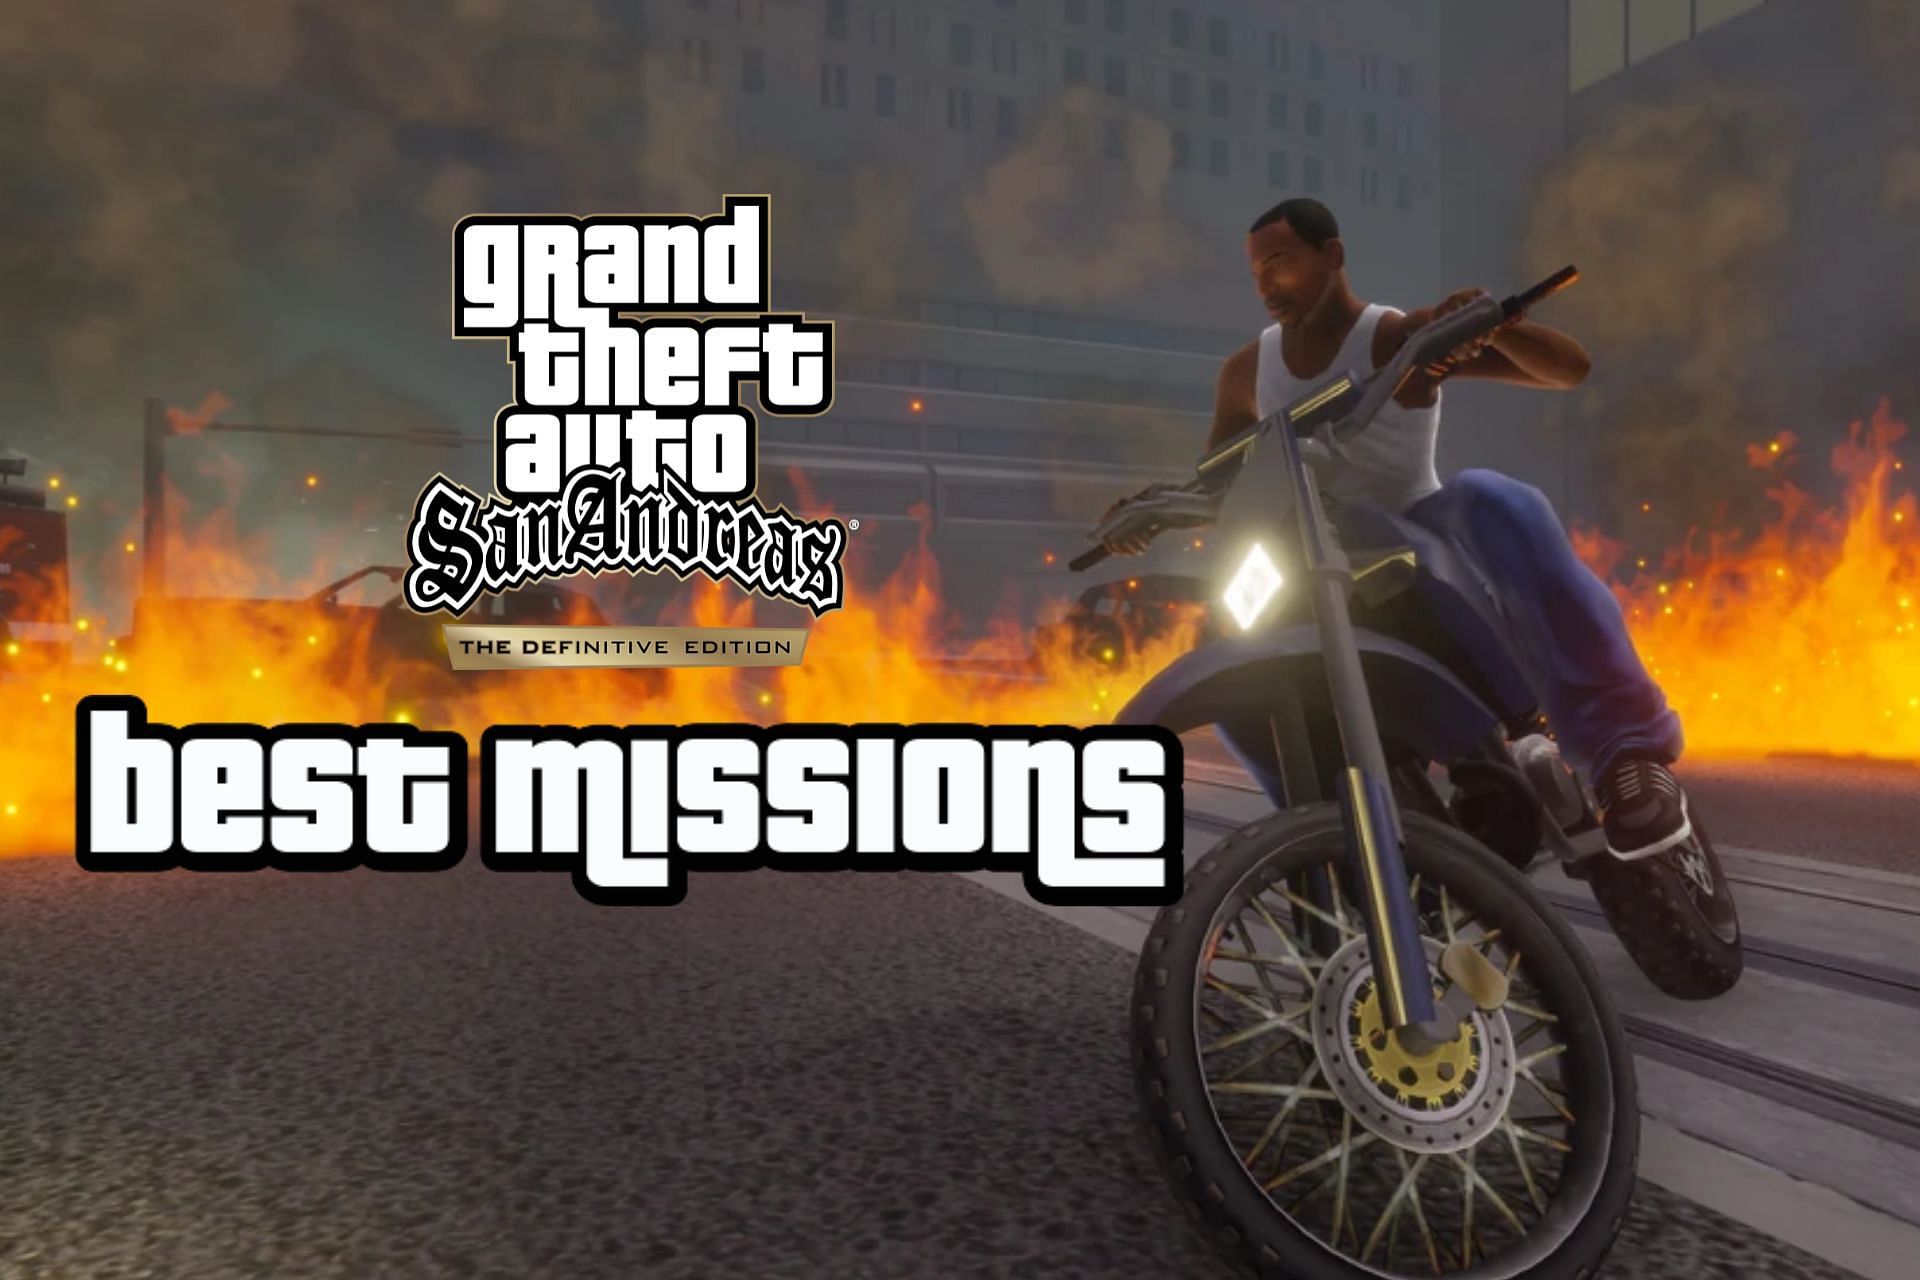 Five of the best missions in GTA San Andreas Definitive Edition (Image via Rockstar Games)